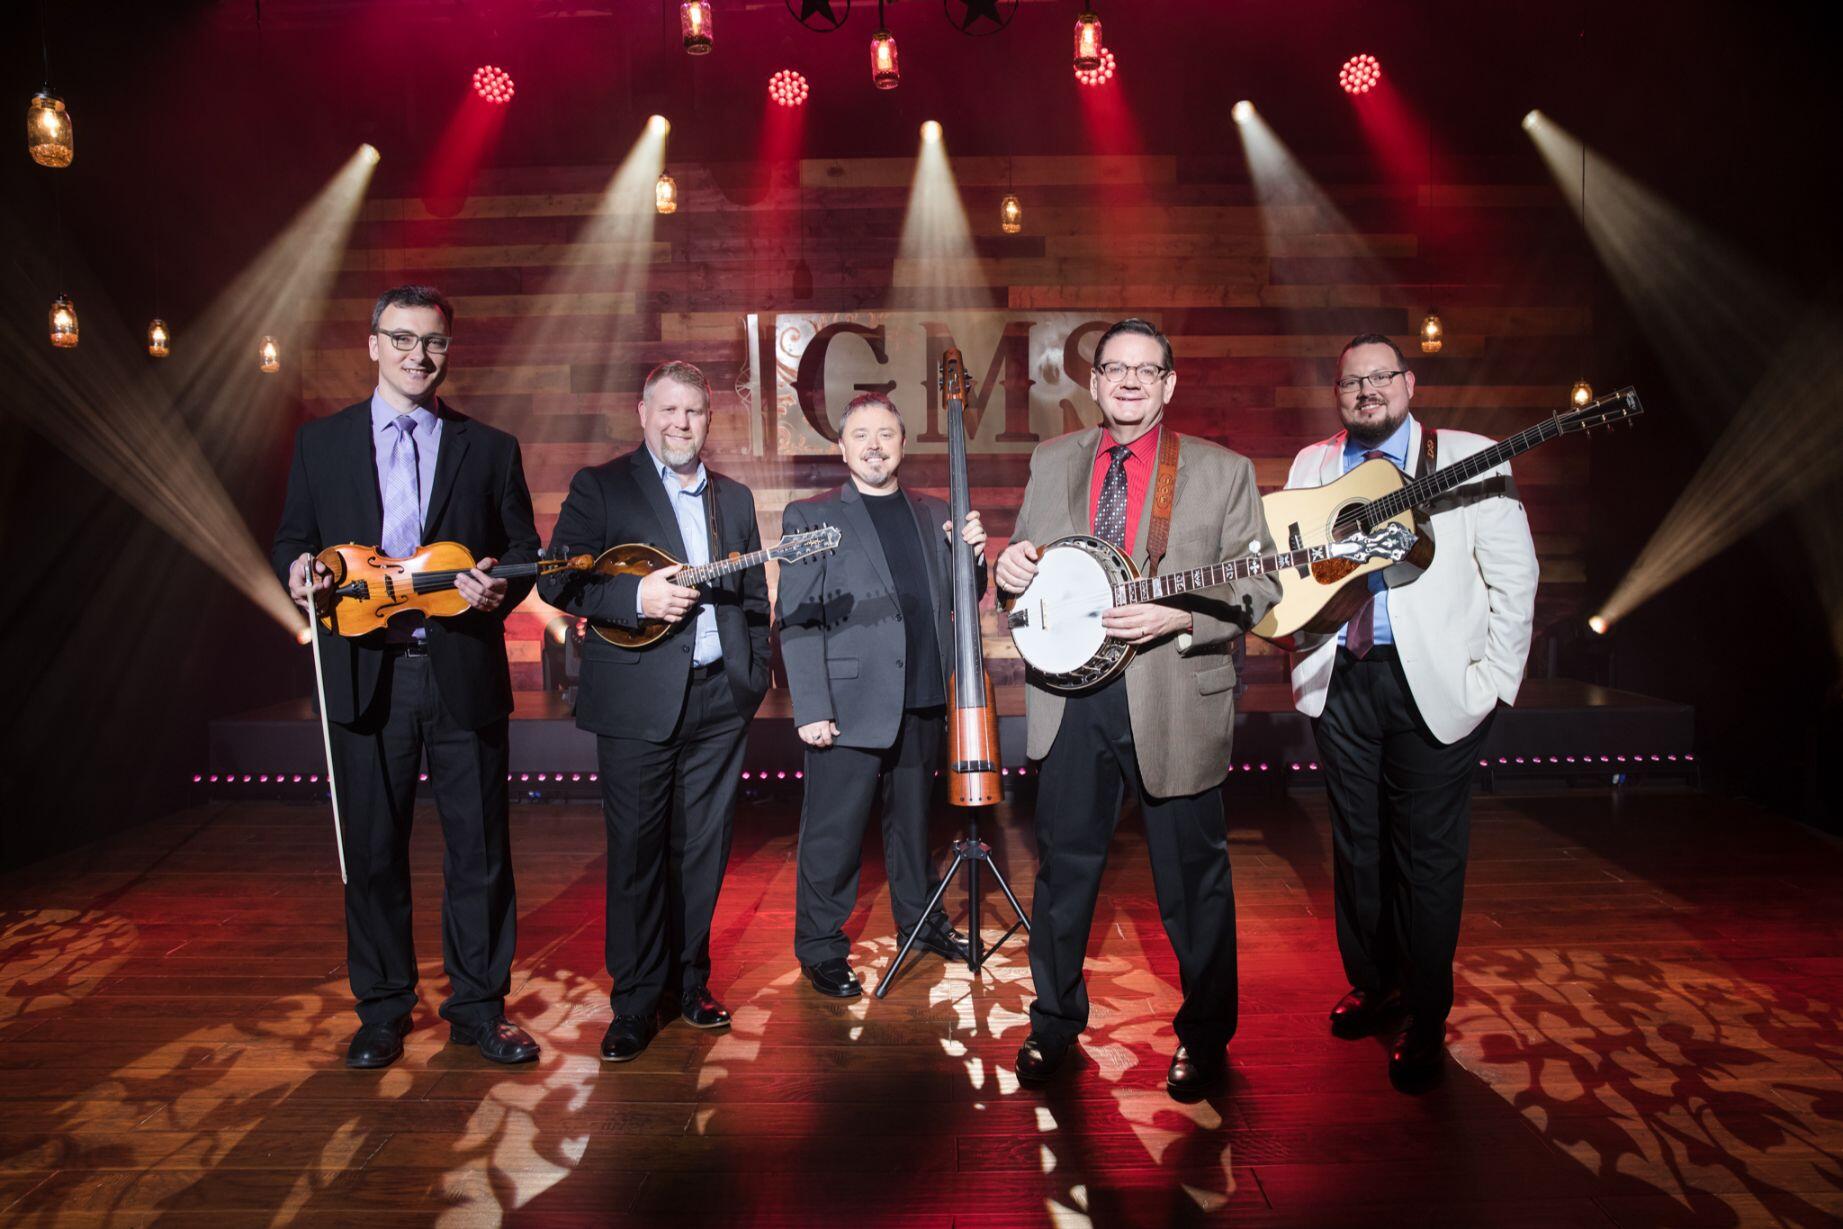 IBMA Entertainer of the Year Award 2019 recipient Joe Mullins and the Radio Ramblers